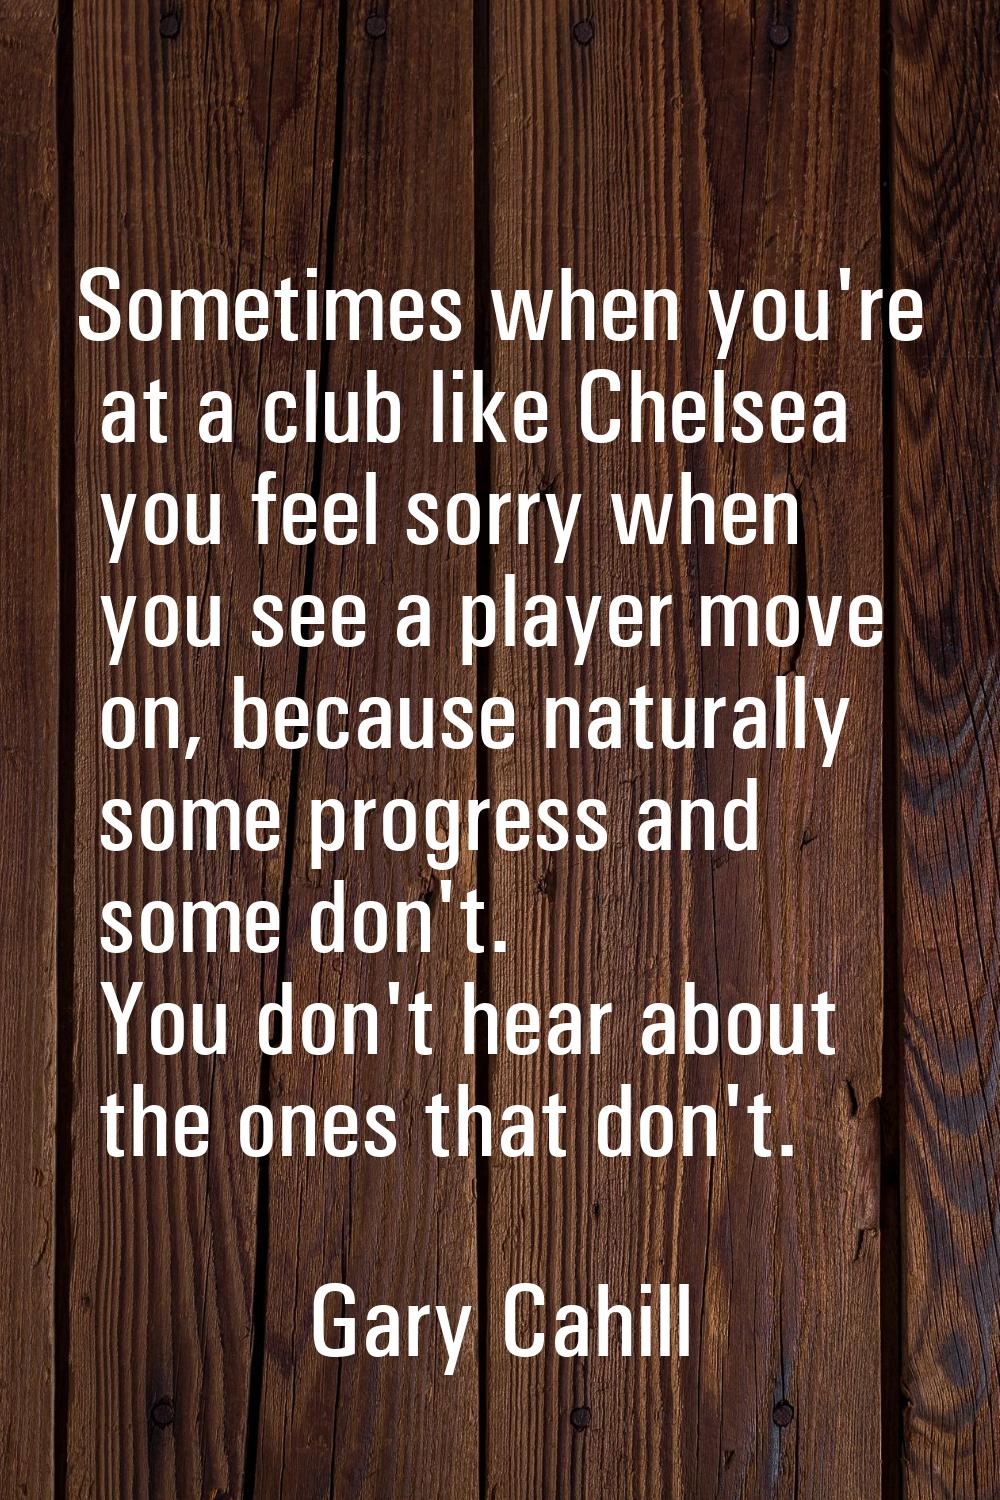 Sometimes when you're at a club like Chelsea you feel sorry when you see a player move on, because 